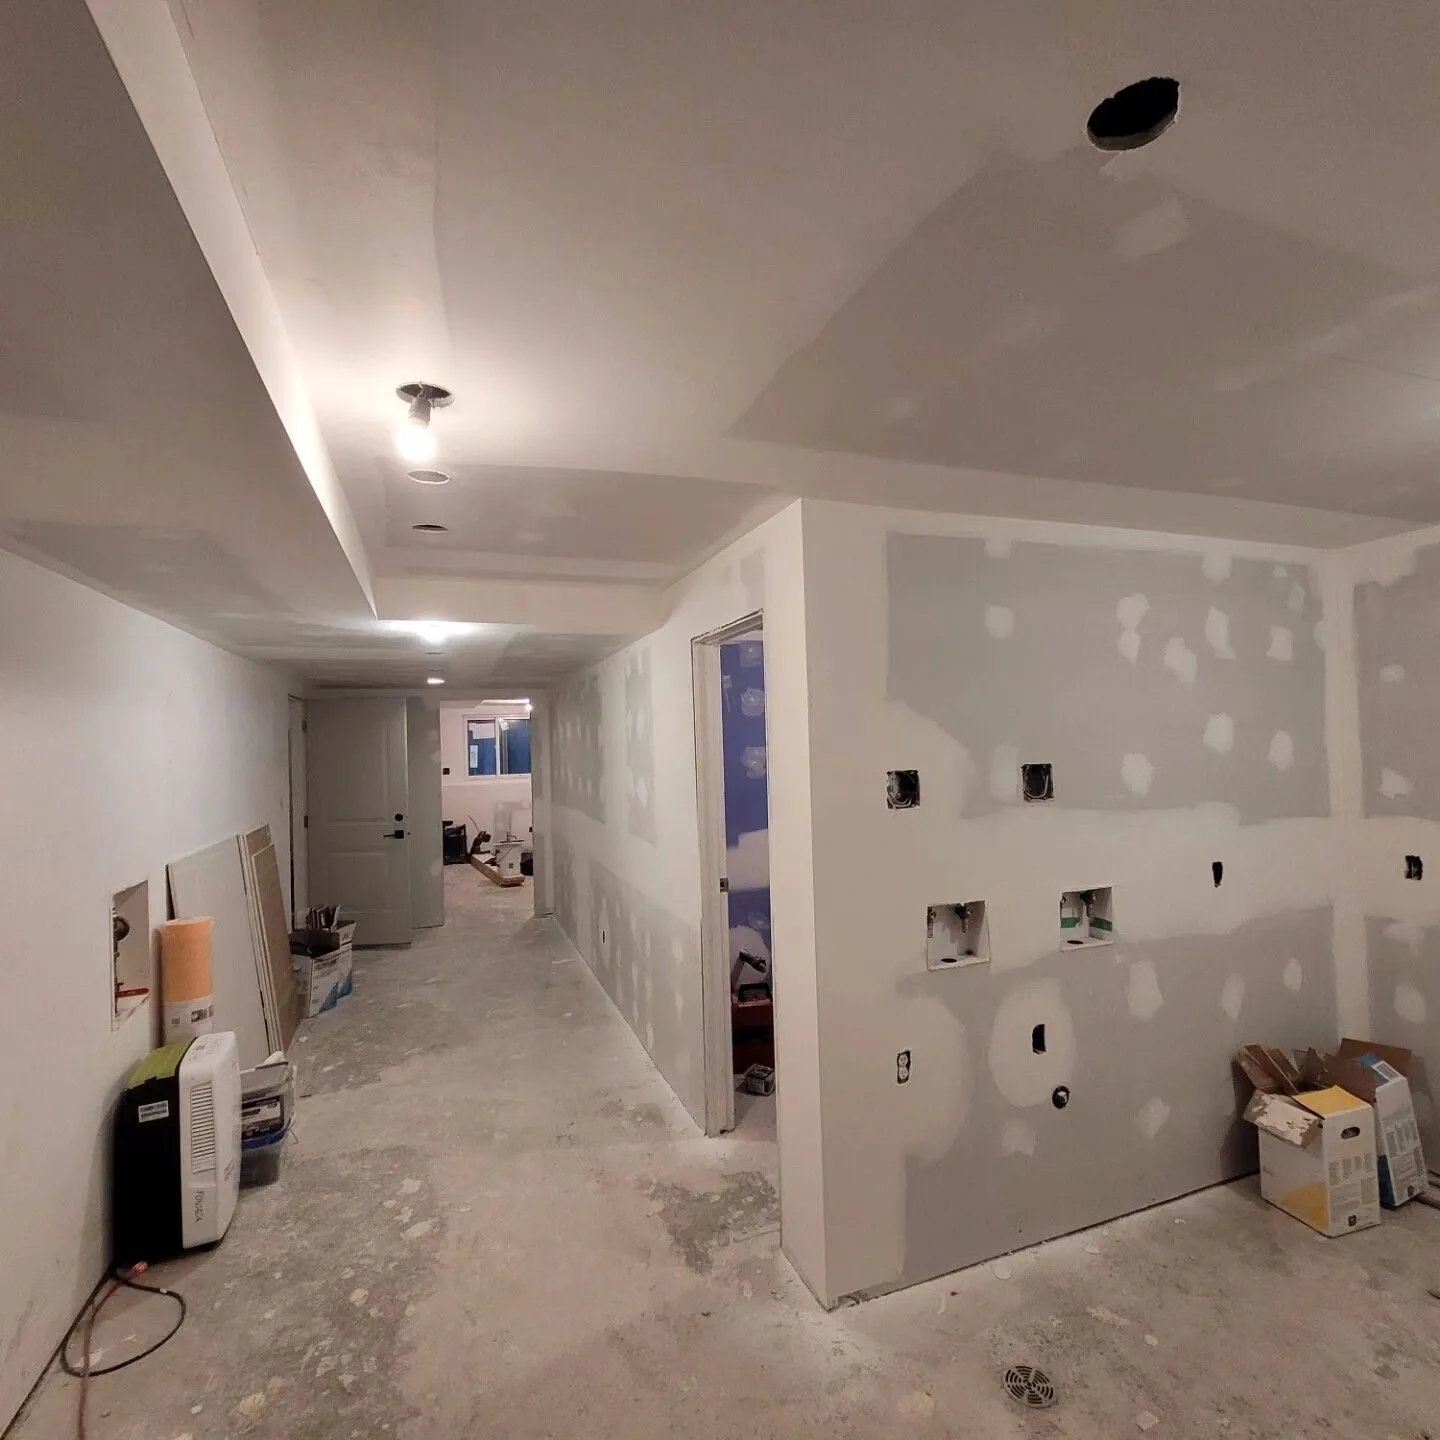 A room with walls being remodeled and a wall in the middle